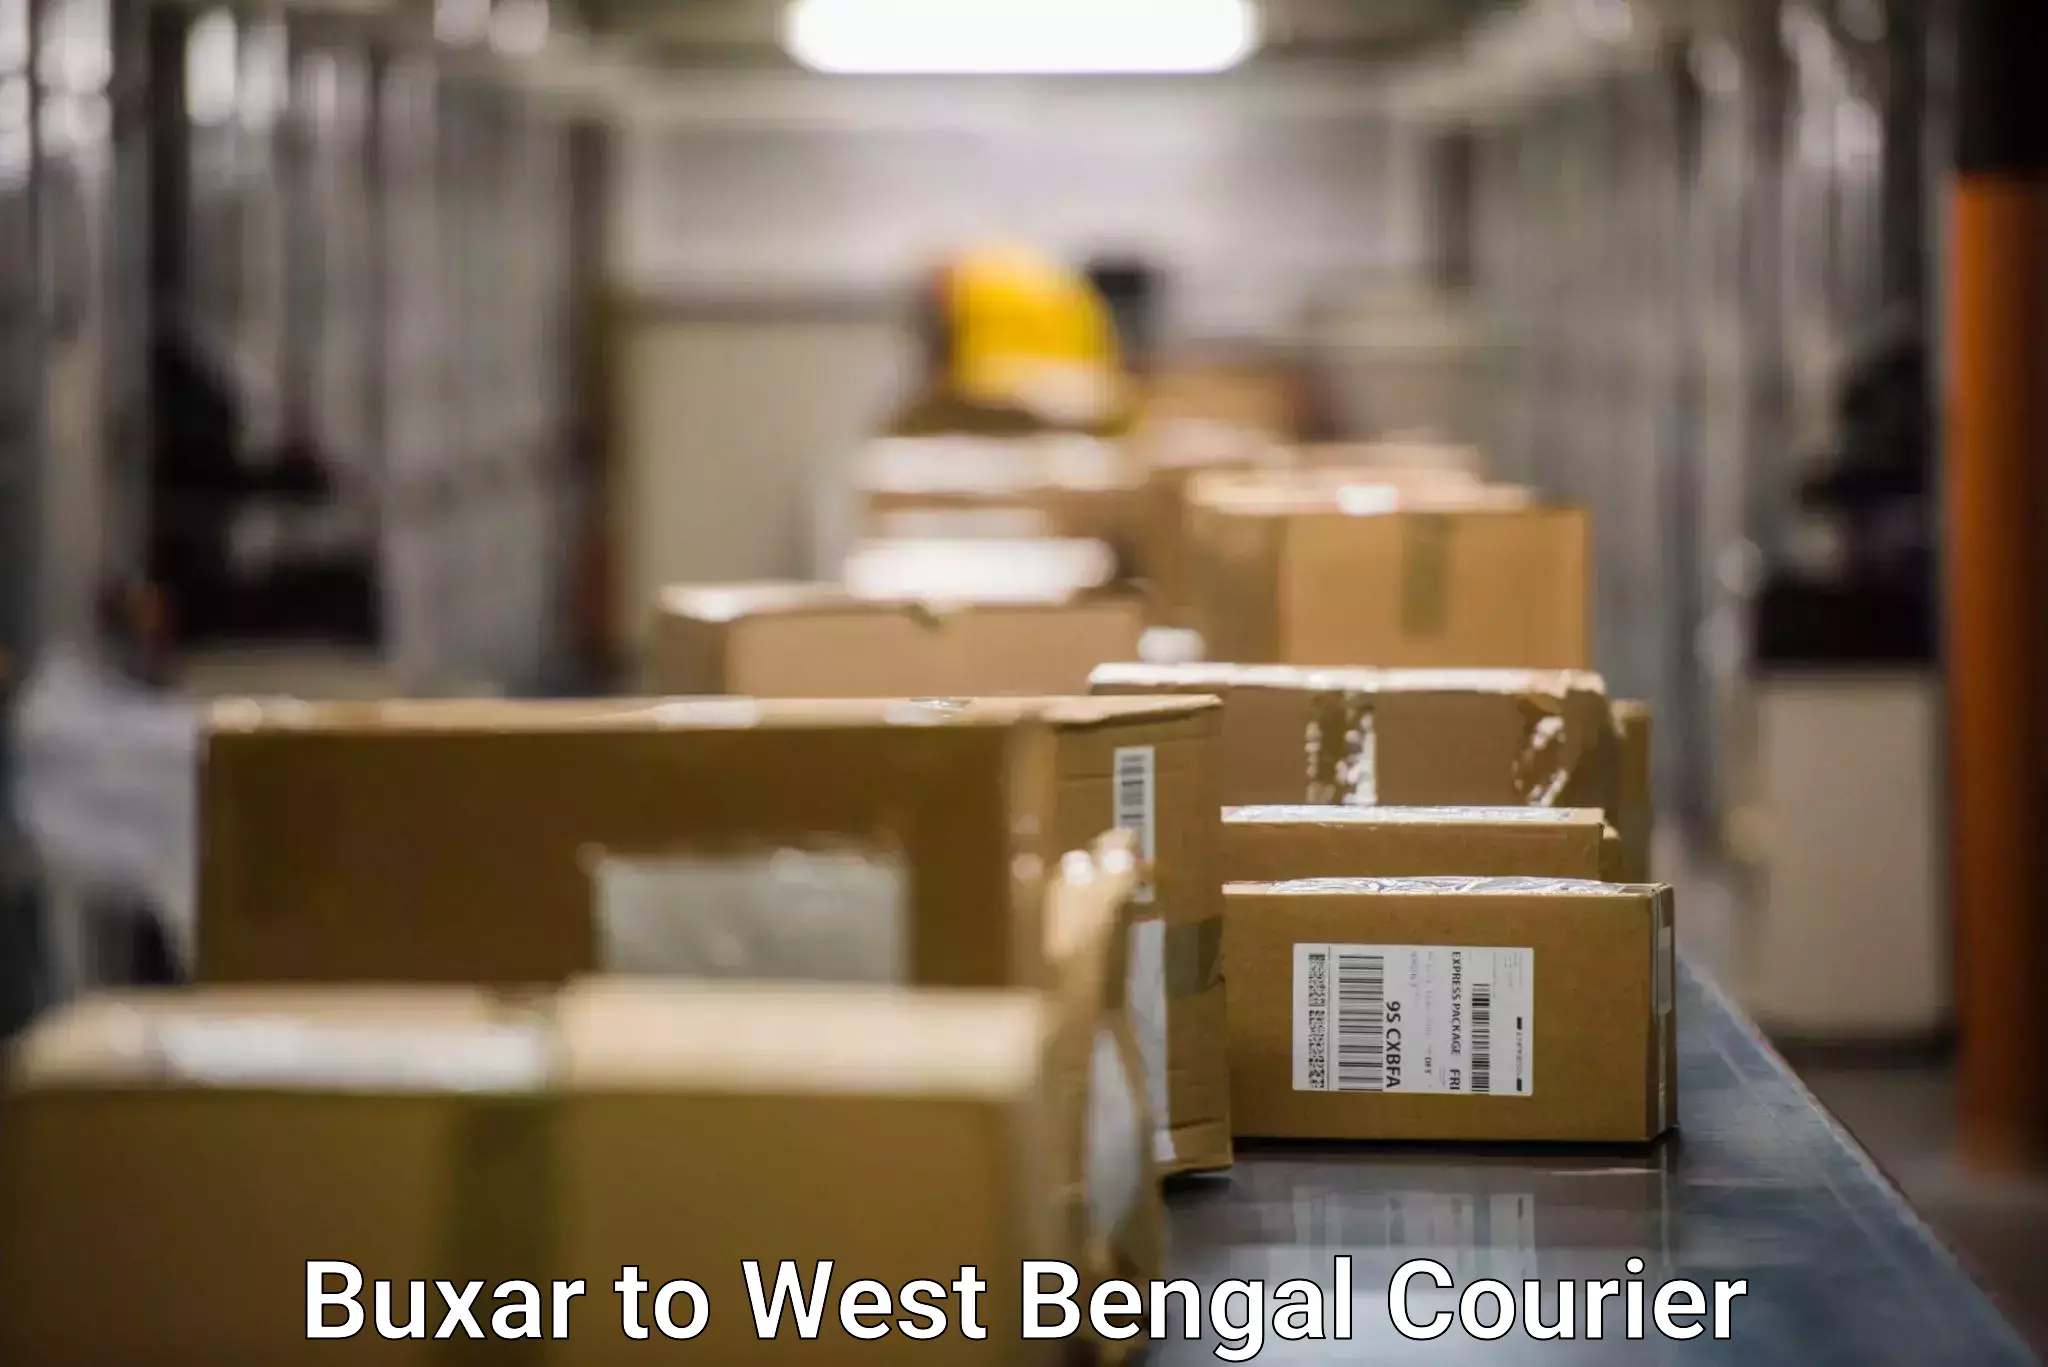 Delivery service partnership Buxar to West Bengal